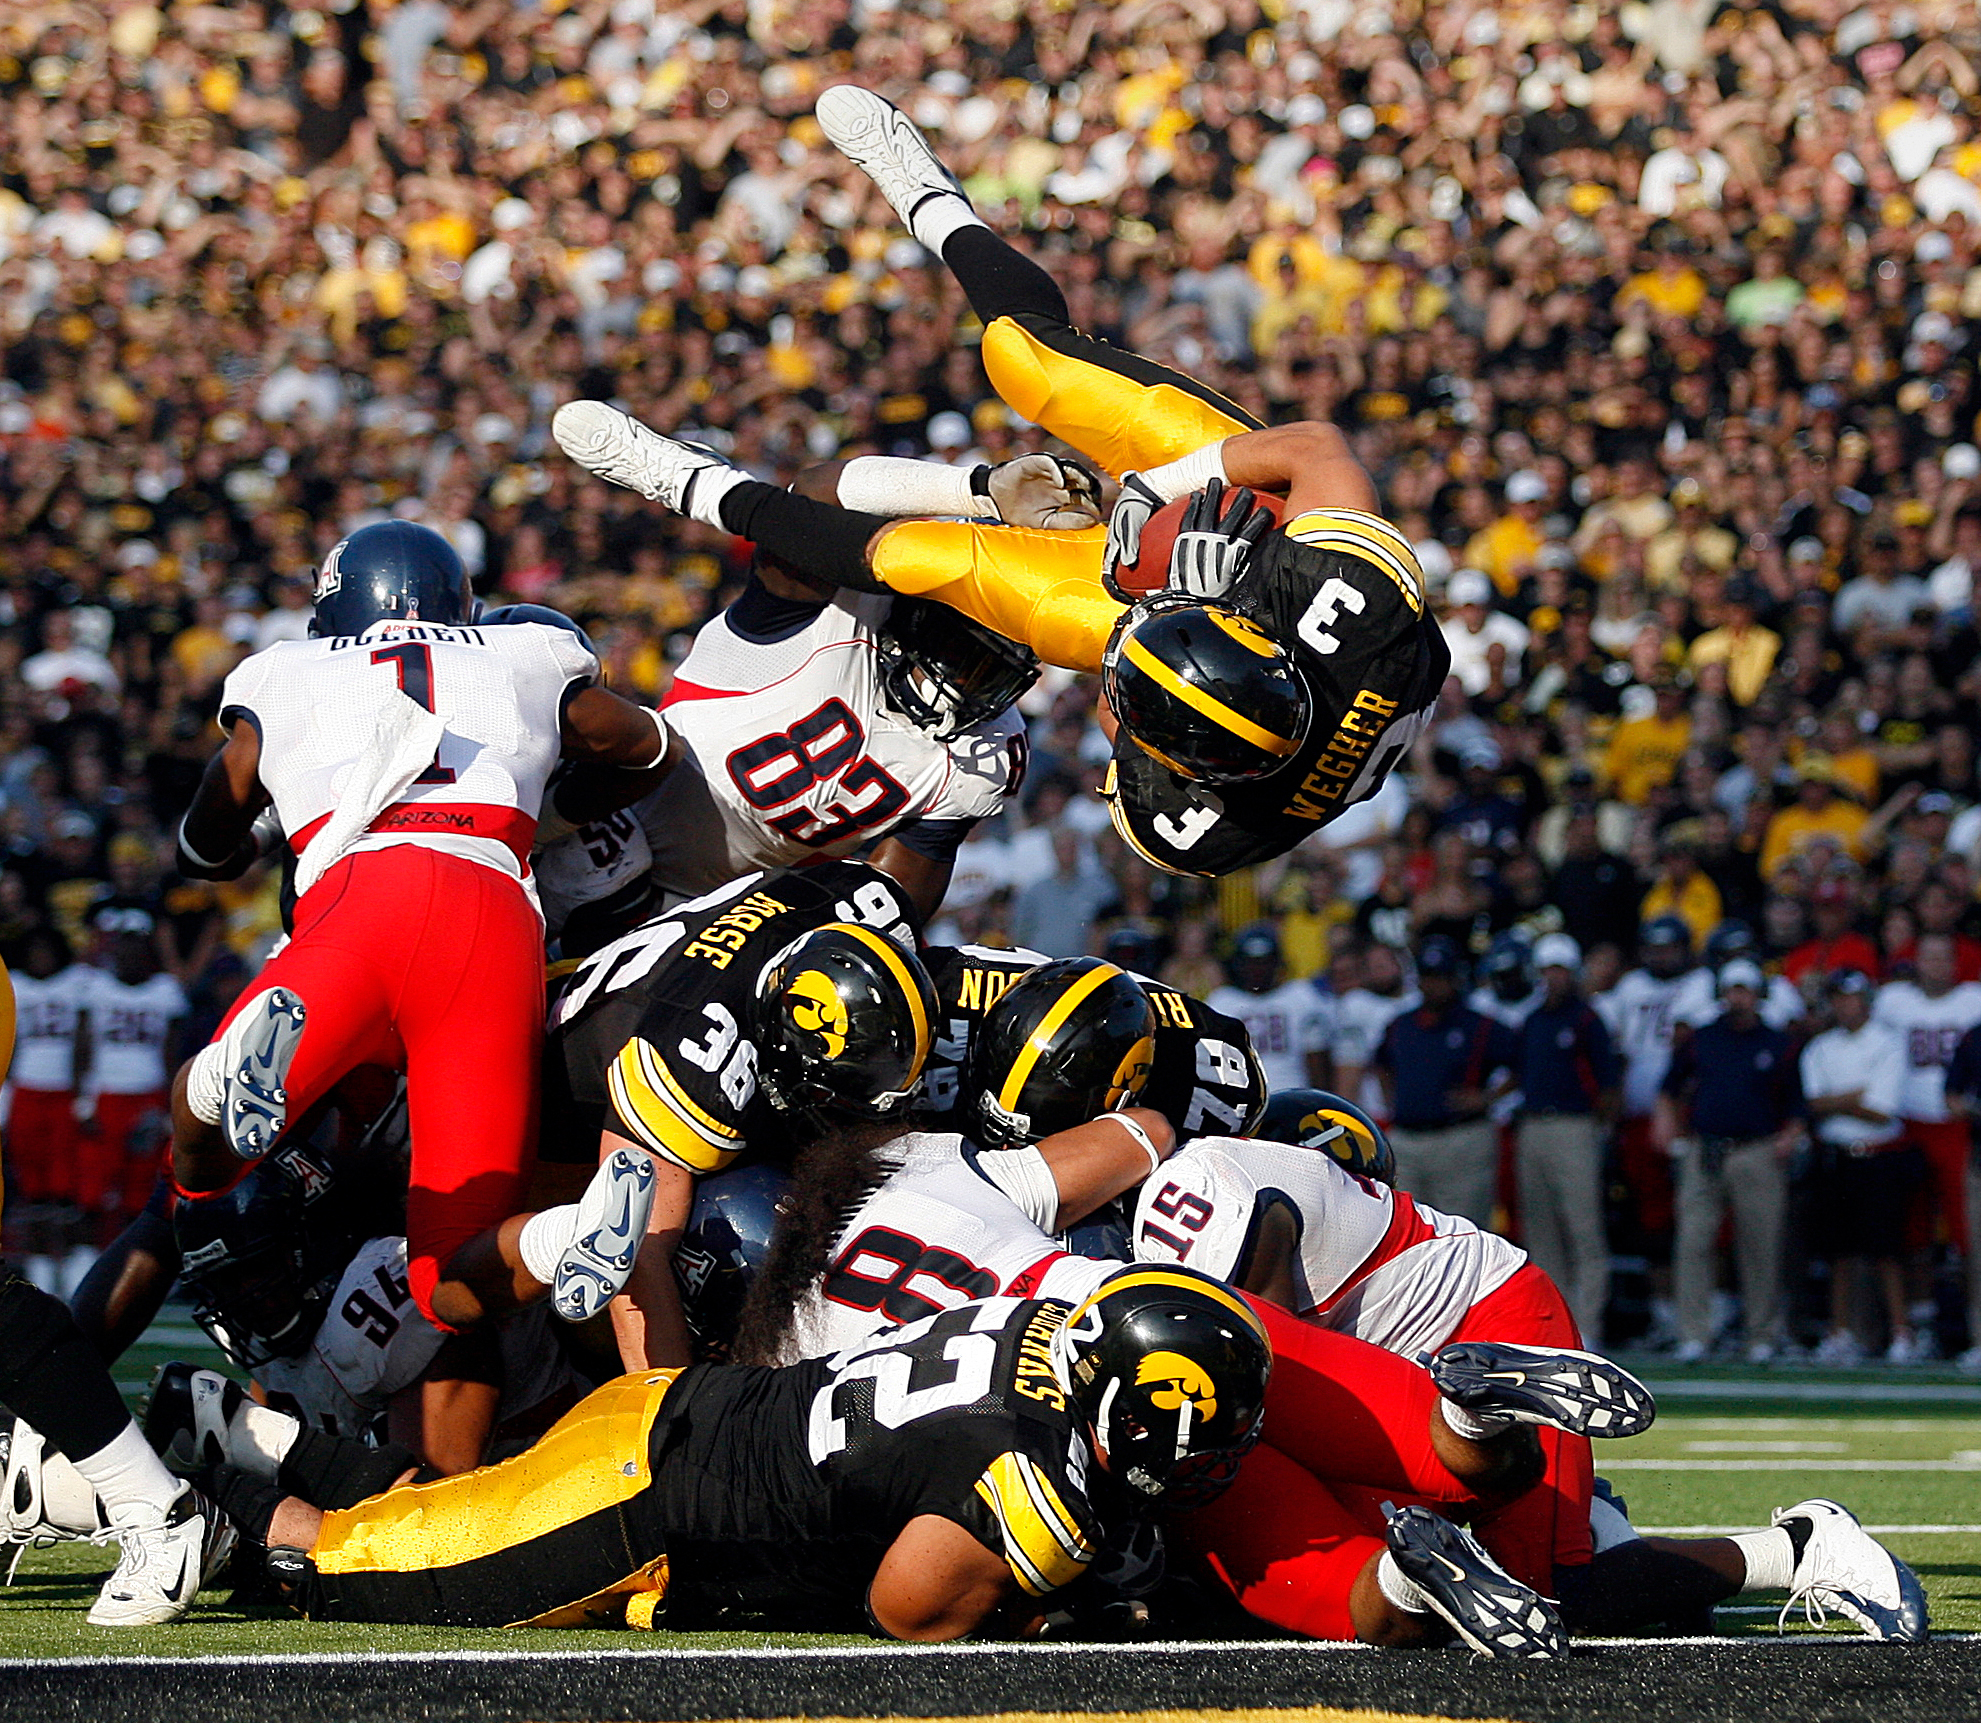  Iowa's Brandon Wegher leaps into the end zone during the Hawkeyes' game against Arizona at Kinnick Stadium. 